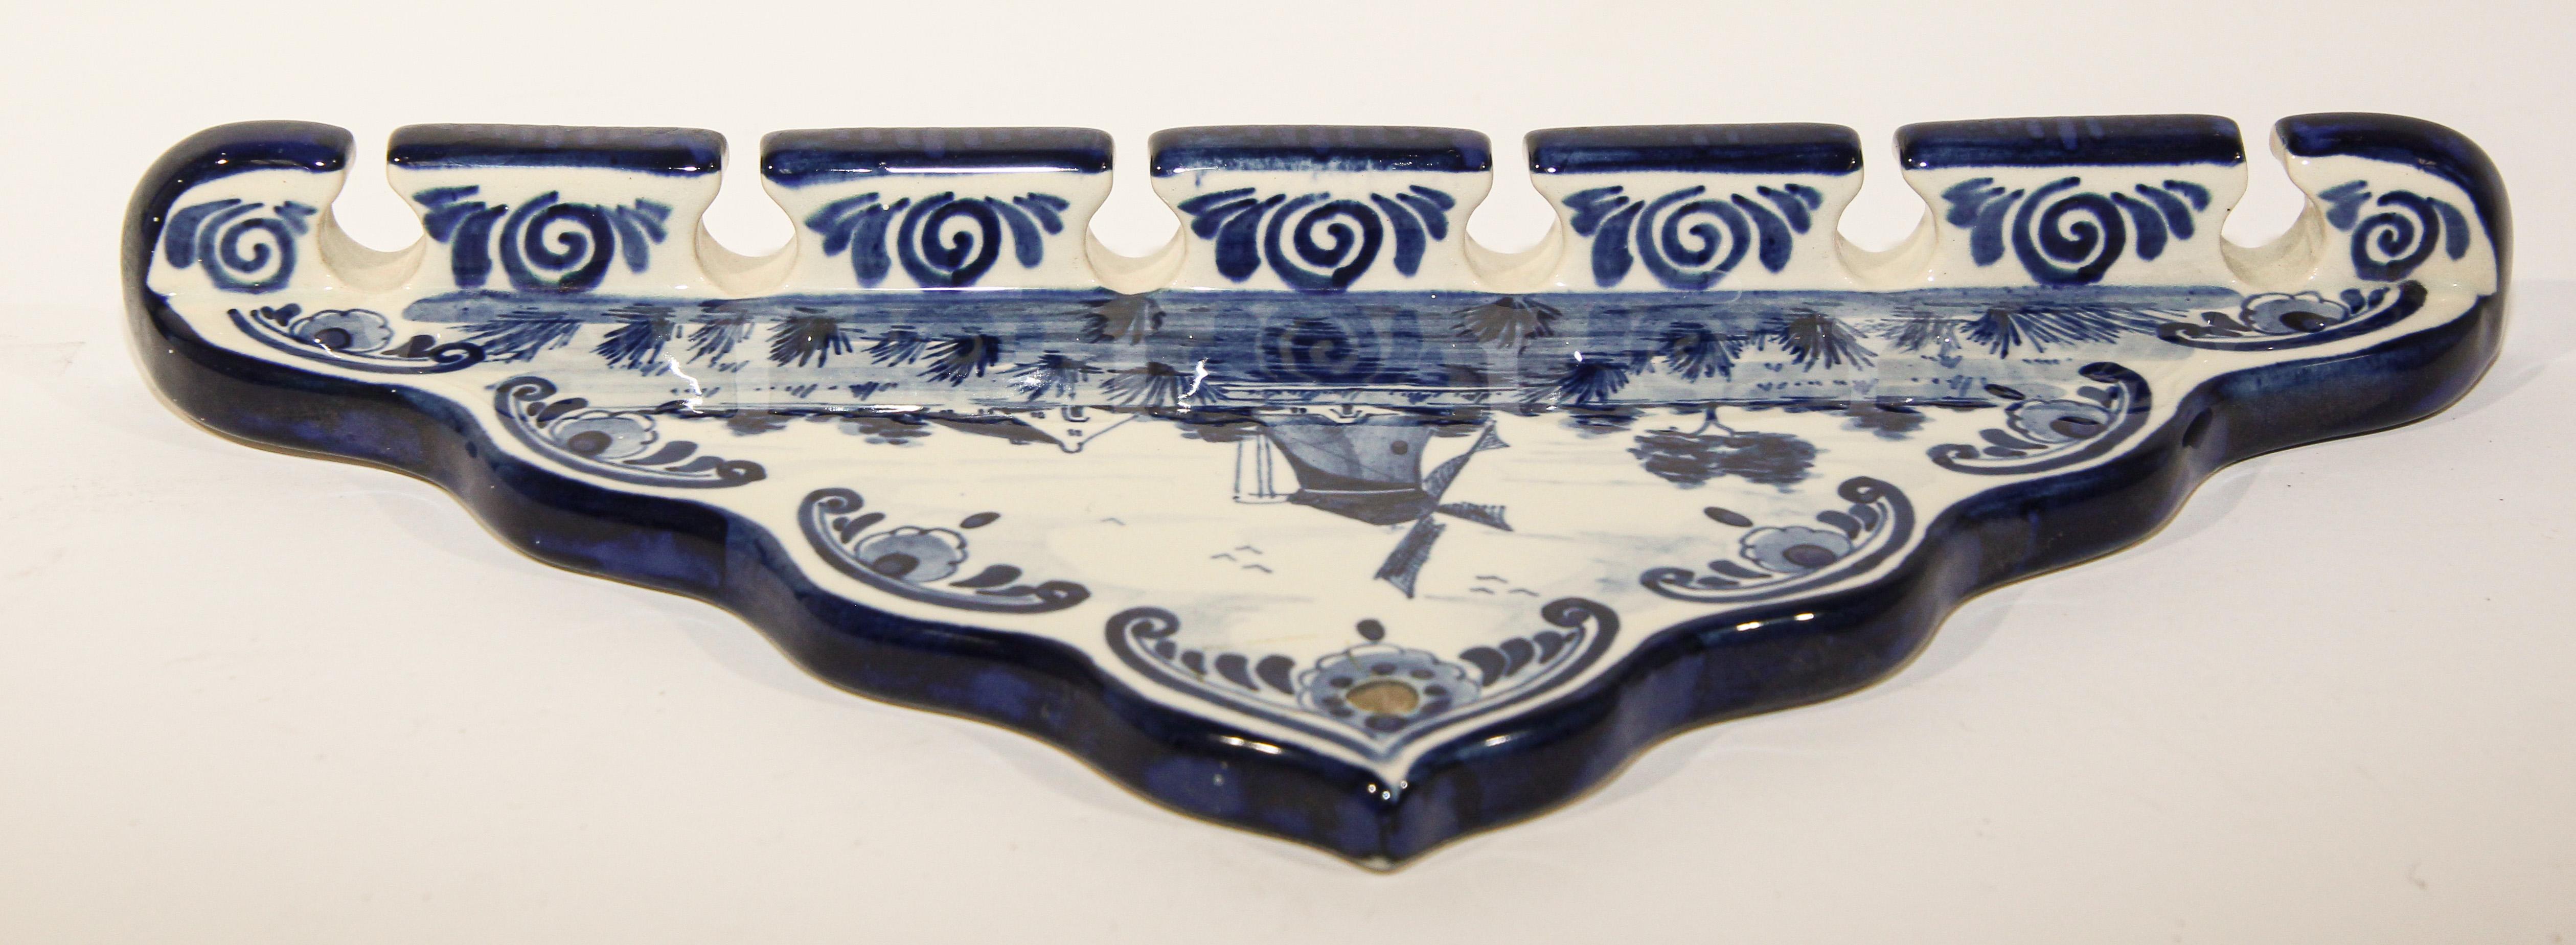 20th Century Vintage Blue and White Delft Porcelain Spoon Rack For Sale